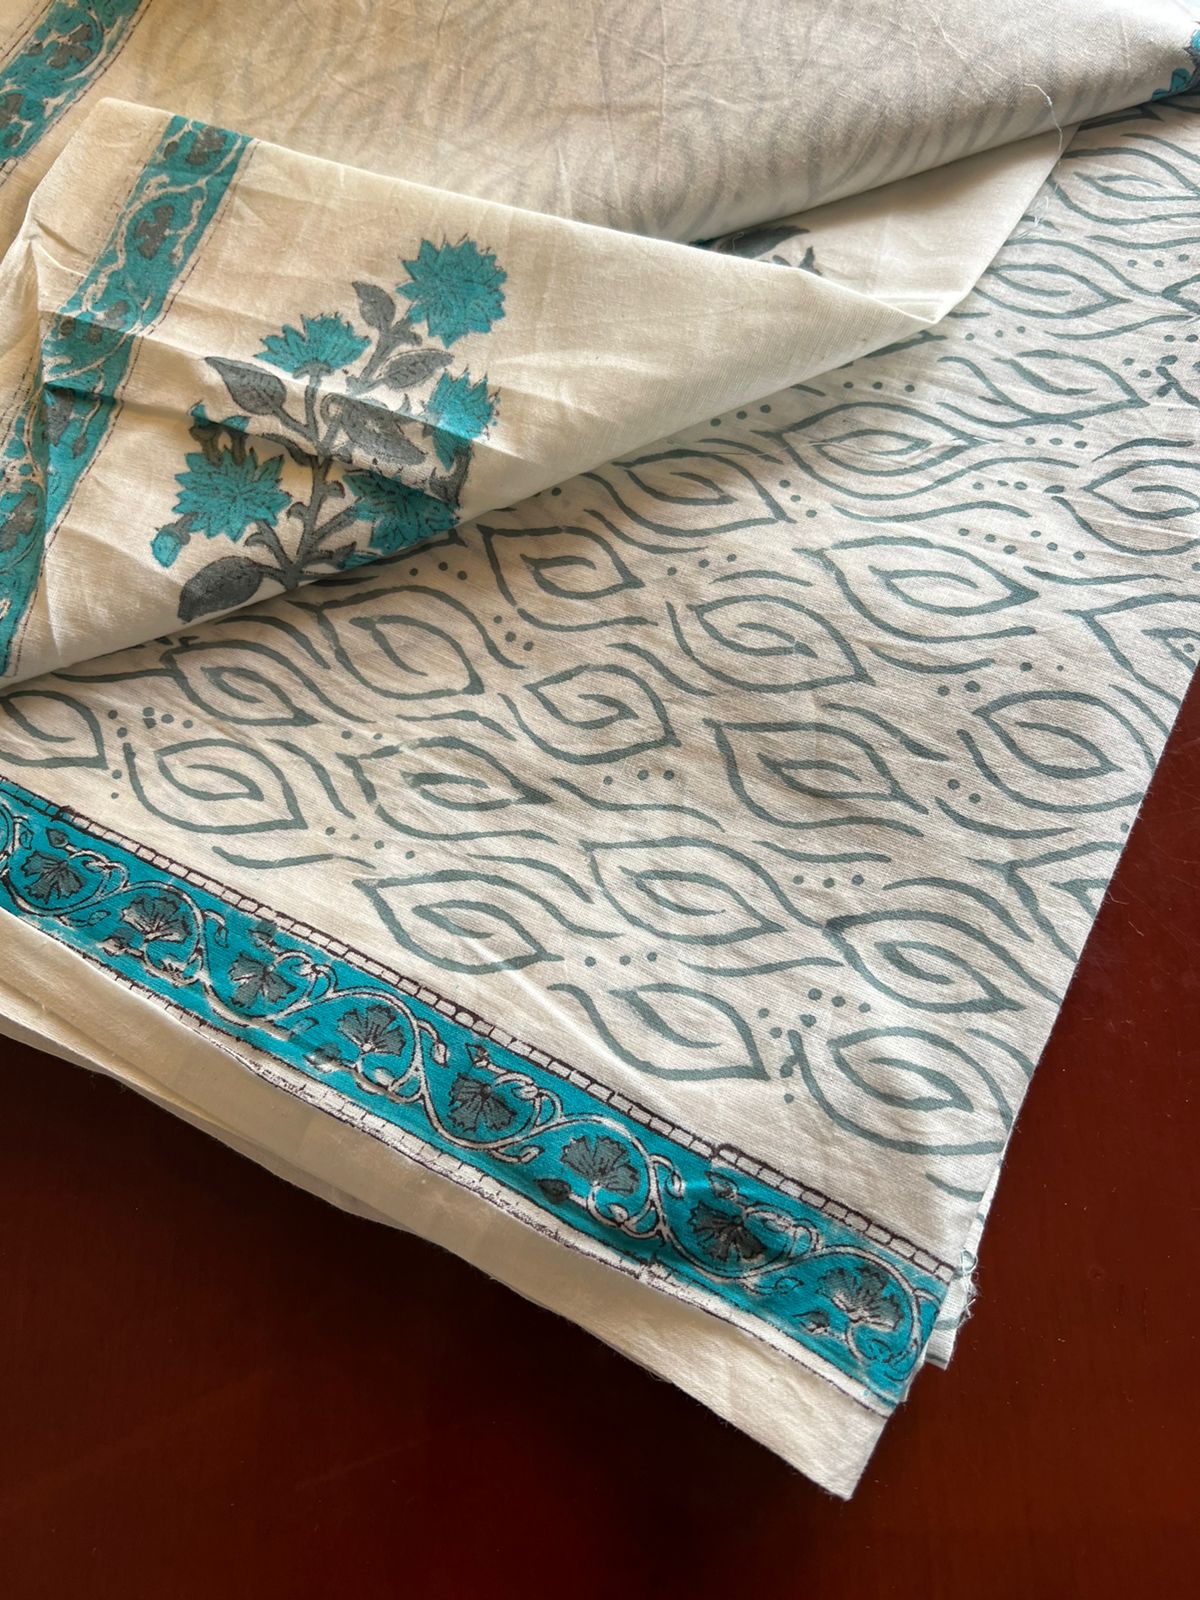 Southloom Green Hand Block Printed Soft Cotton Jaipur Salwar Suit Material in White Base Colour